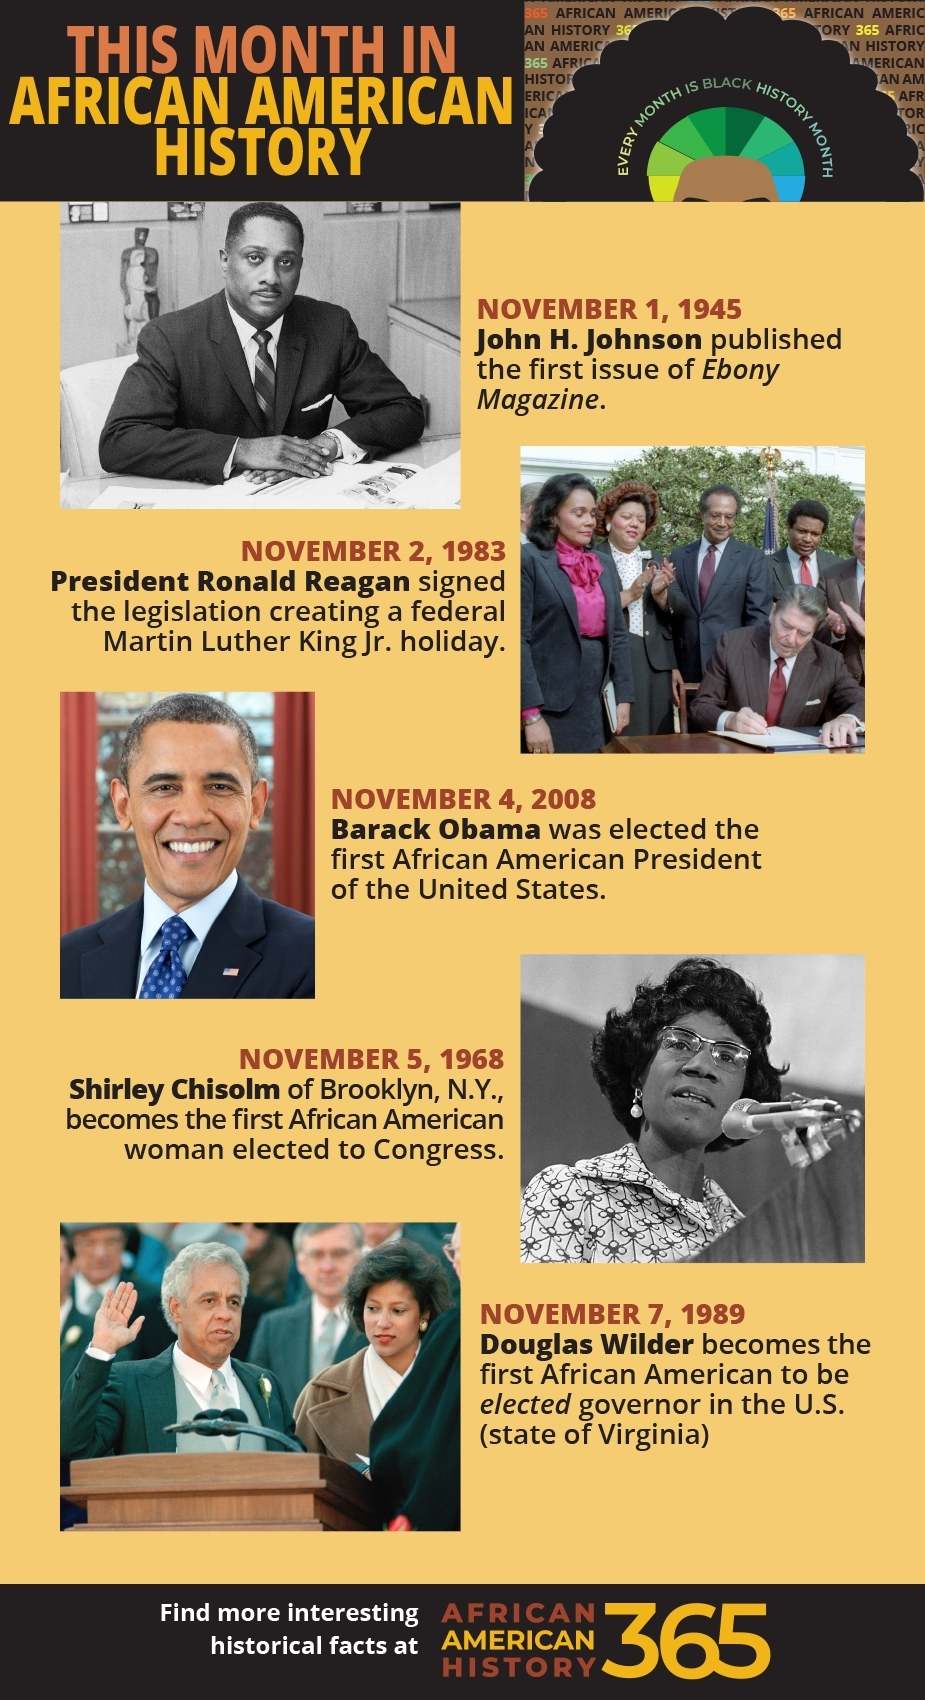 This month in African American History